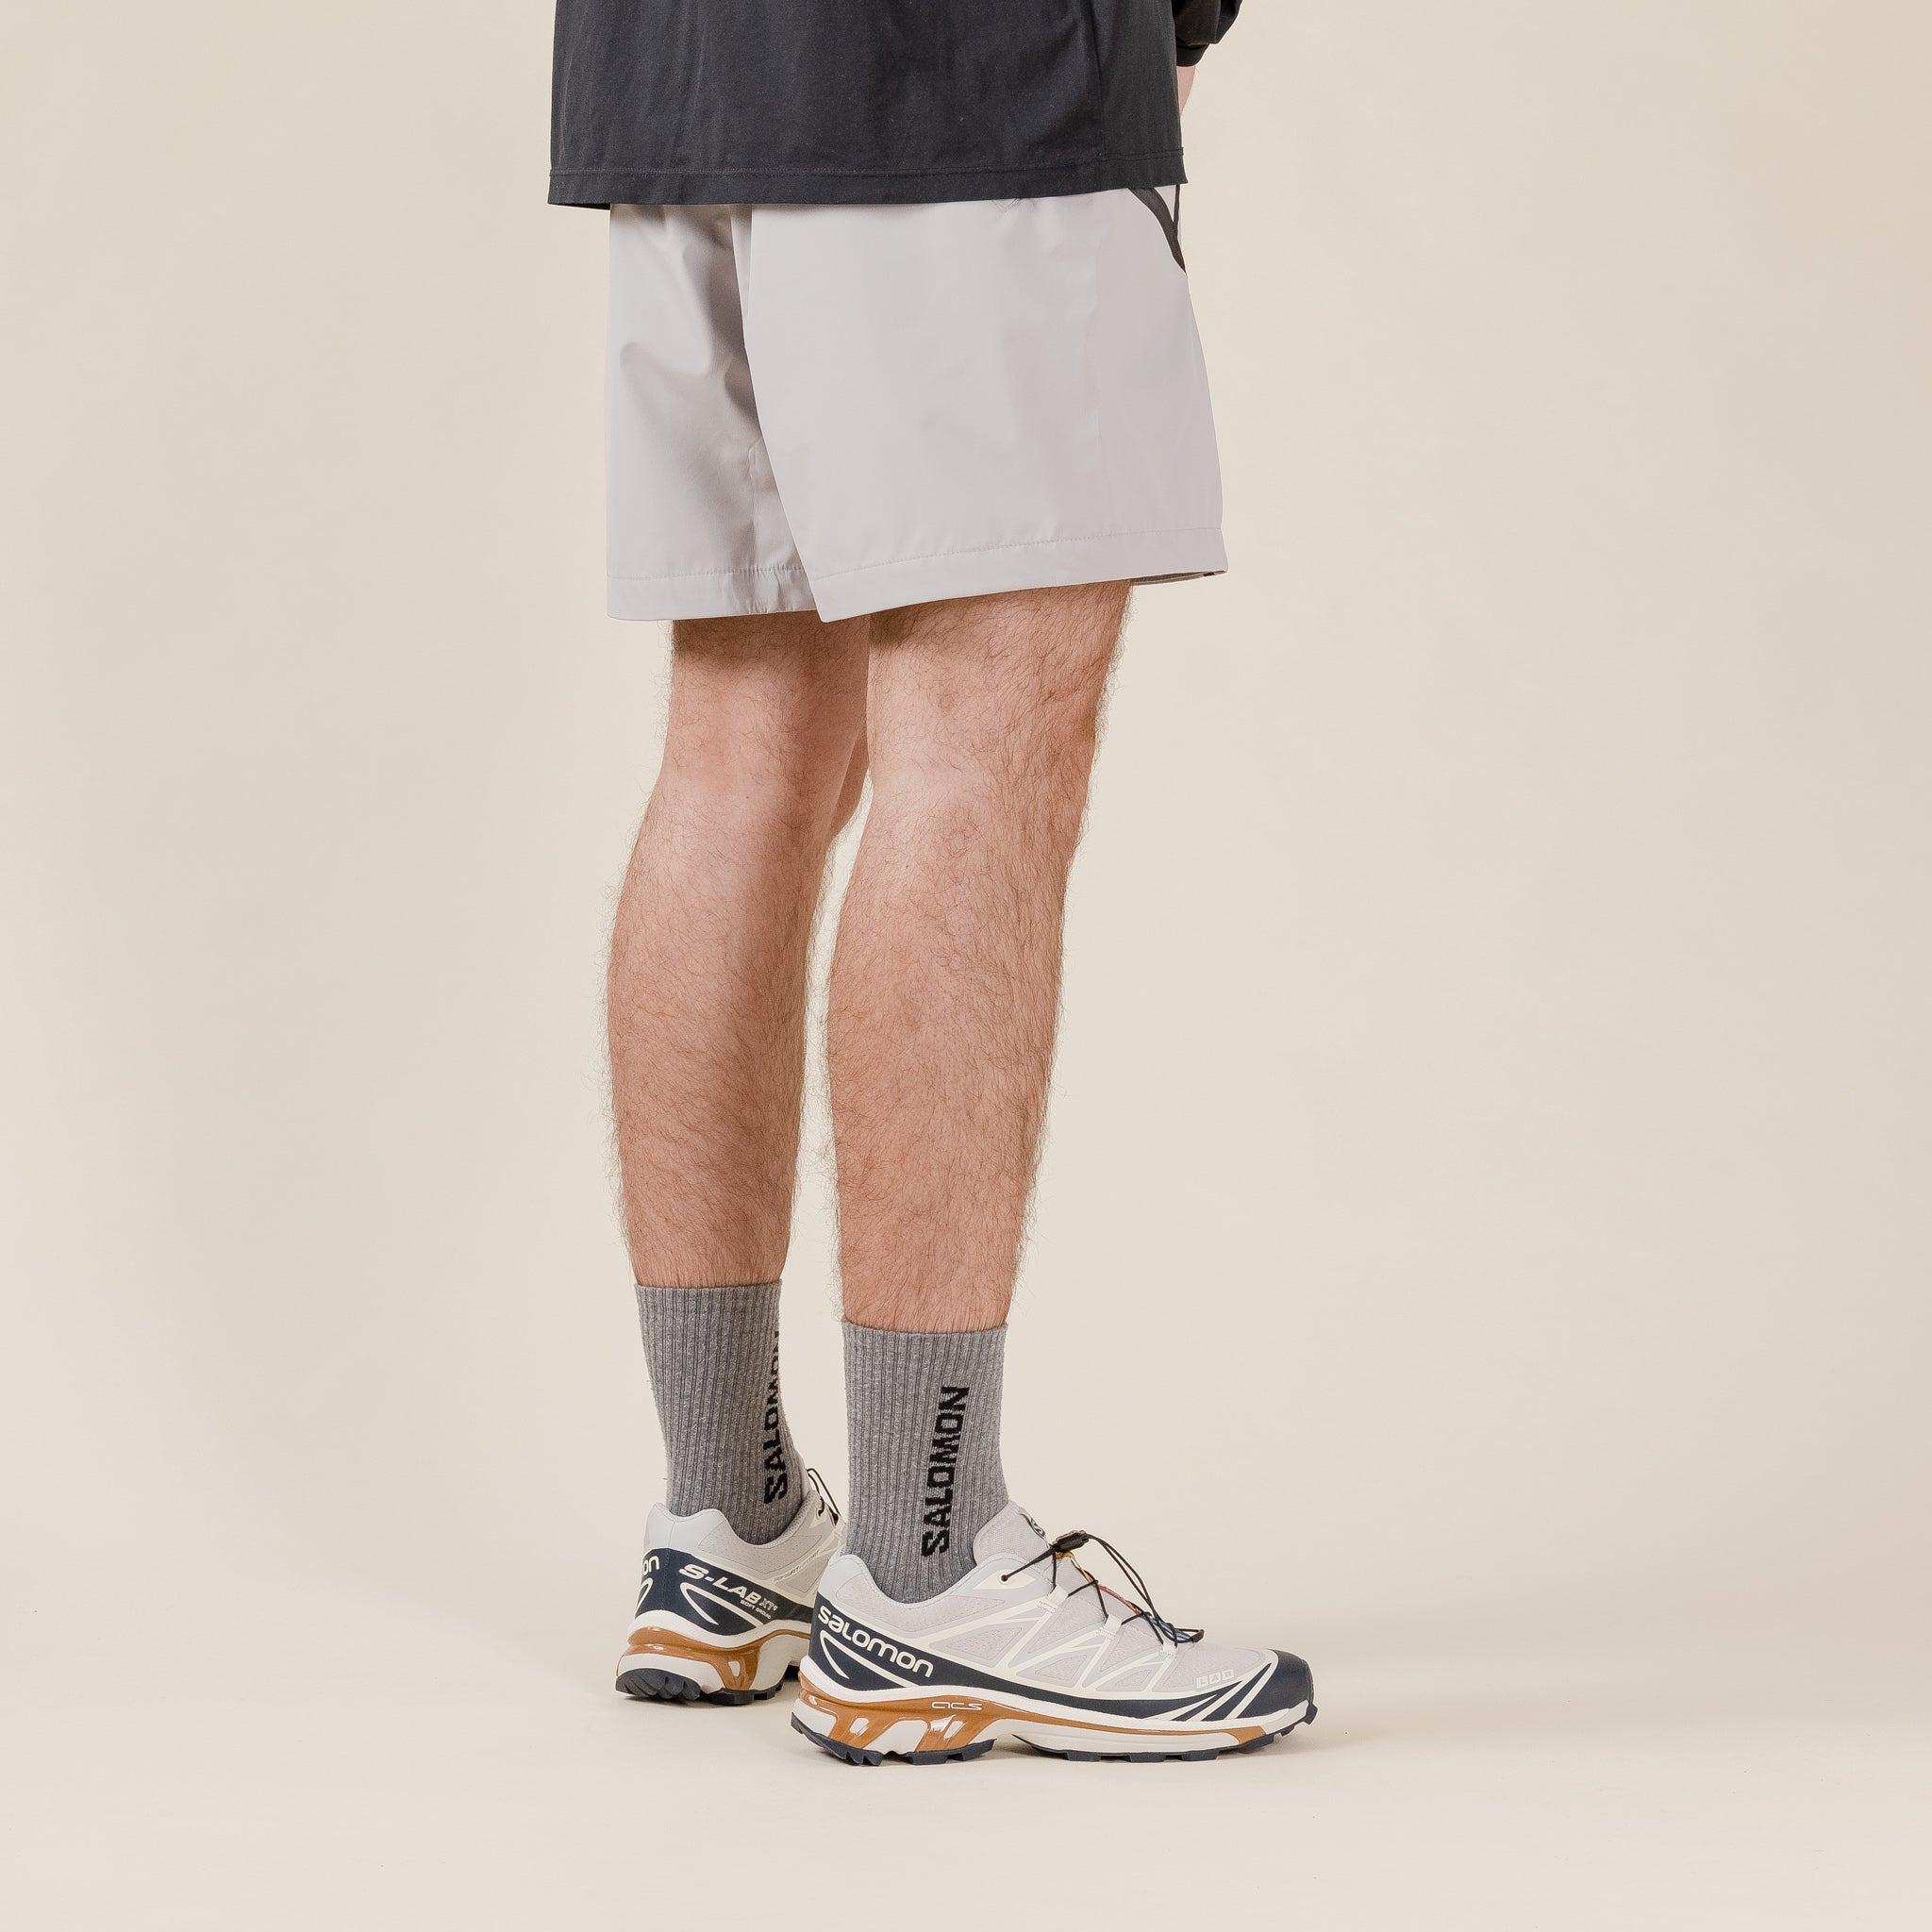 Welter Experiment - WSP001 Seam Sealed 3Layer Shorts - Grey "welter experiment stockists" "welter experiment uk" "welter experiment korea"